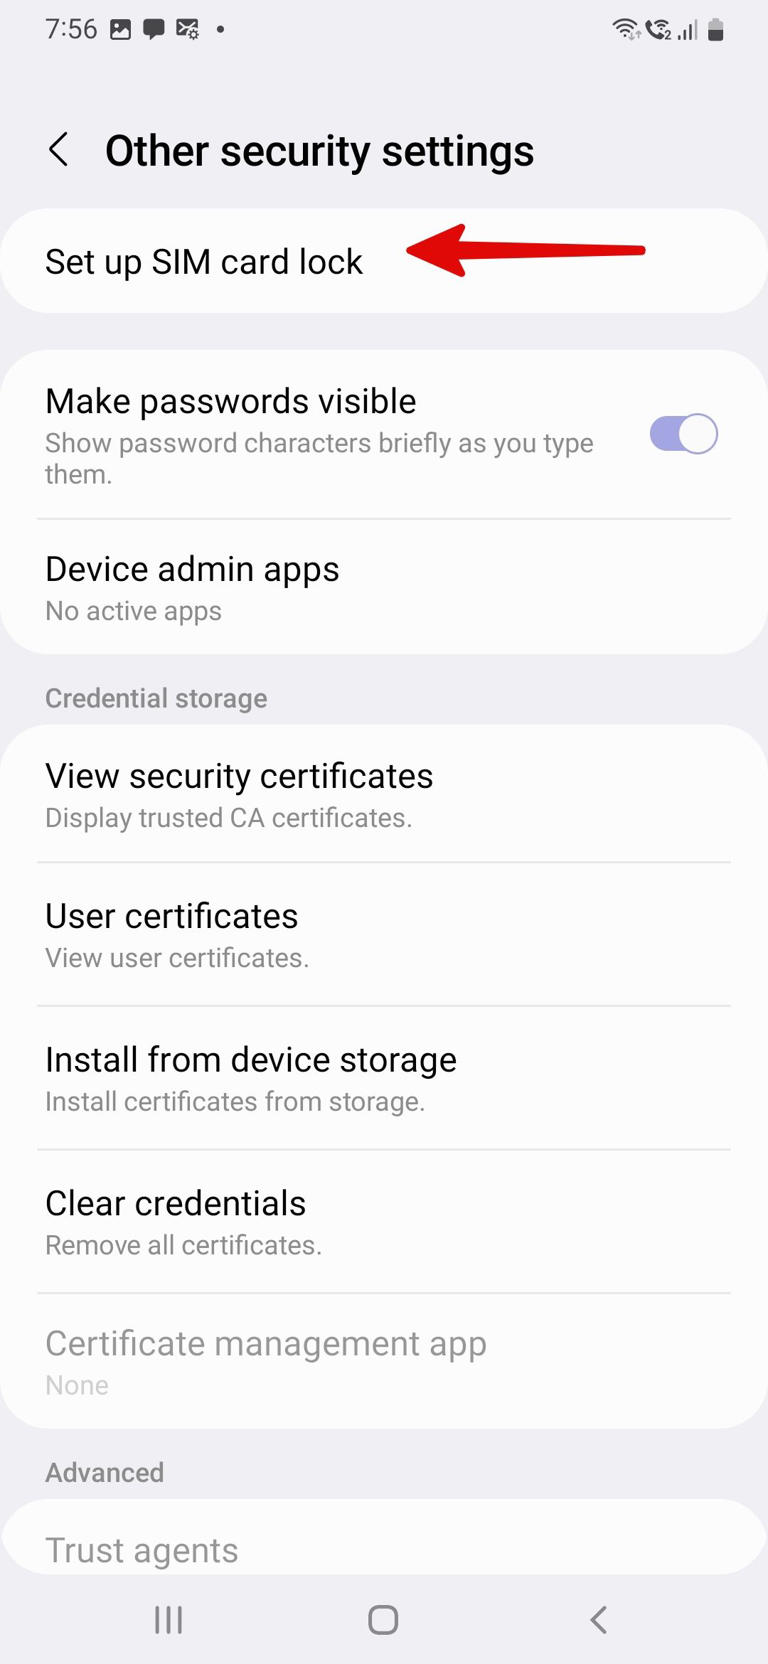 Other security settings on a Samsung phone with a red arrow pointing to the Set up SIM card lock option